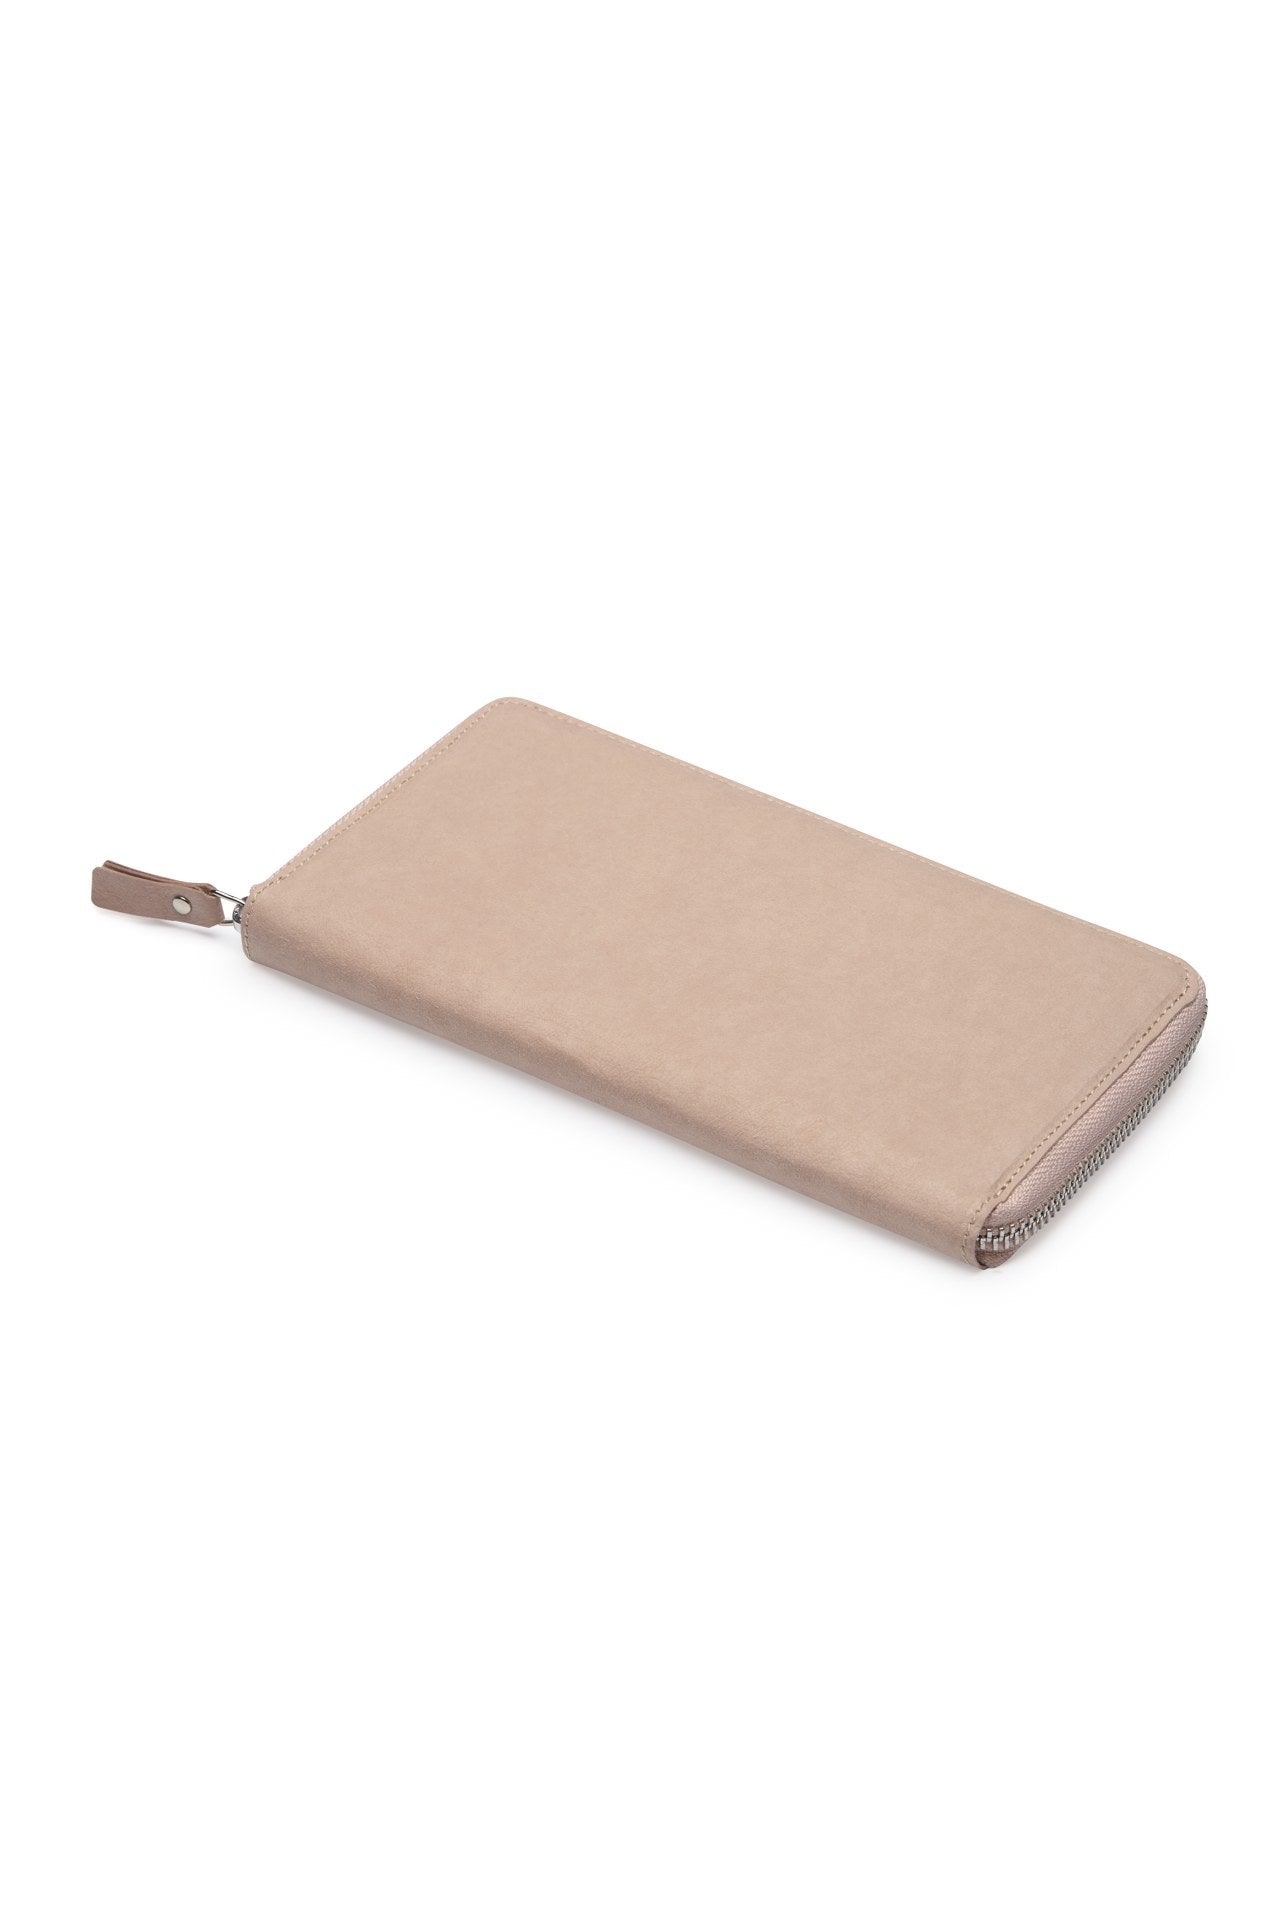 The outside of a large zippered washable paper wallet is shown. The image also shows a silver zip and washable paper zip pull. The wallet shown is pale pink.